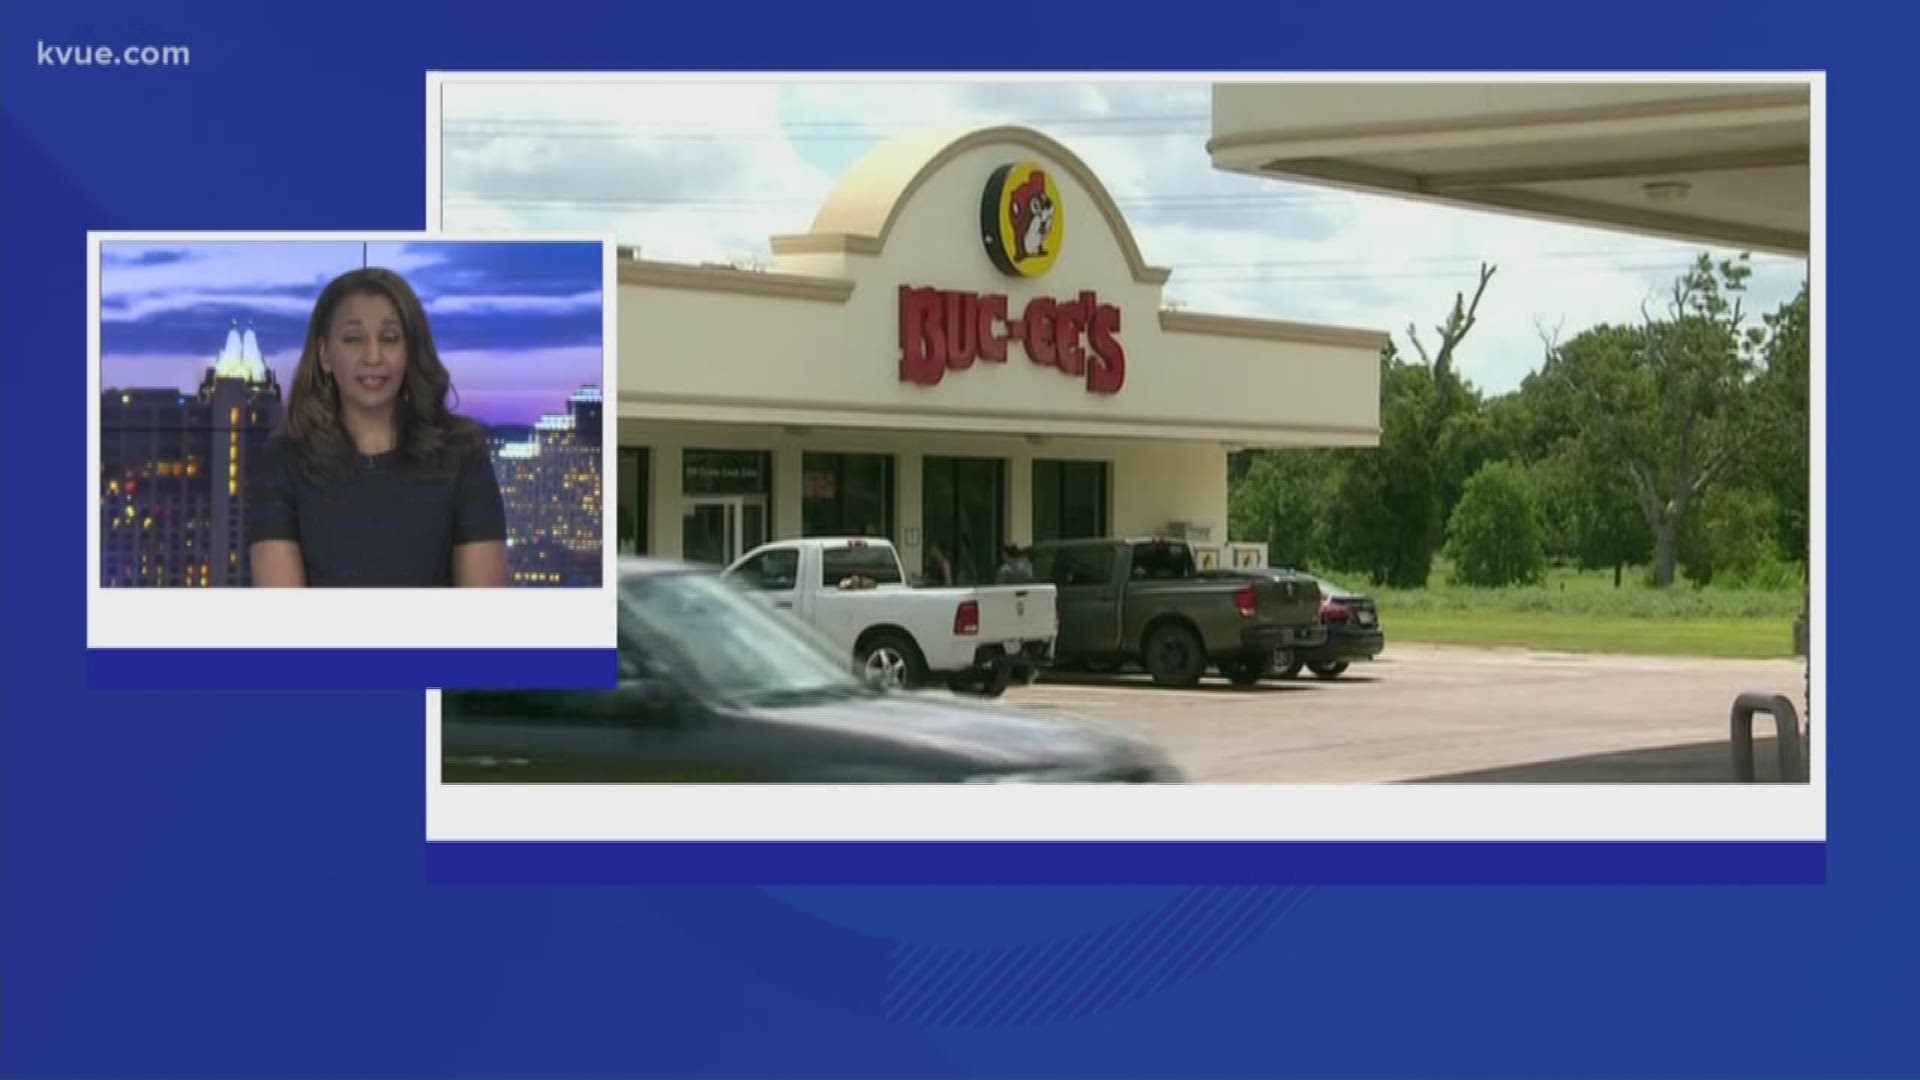 Buc-ee's opened its first store outside of Texas, just east of Mobile, Alabama.